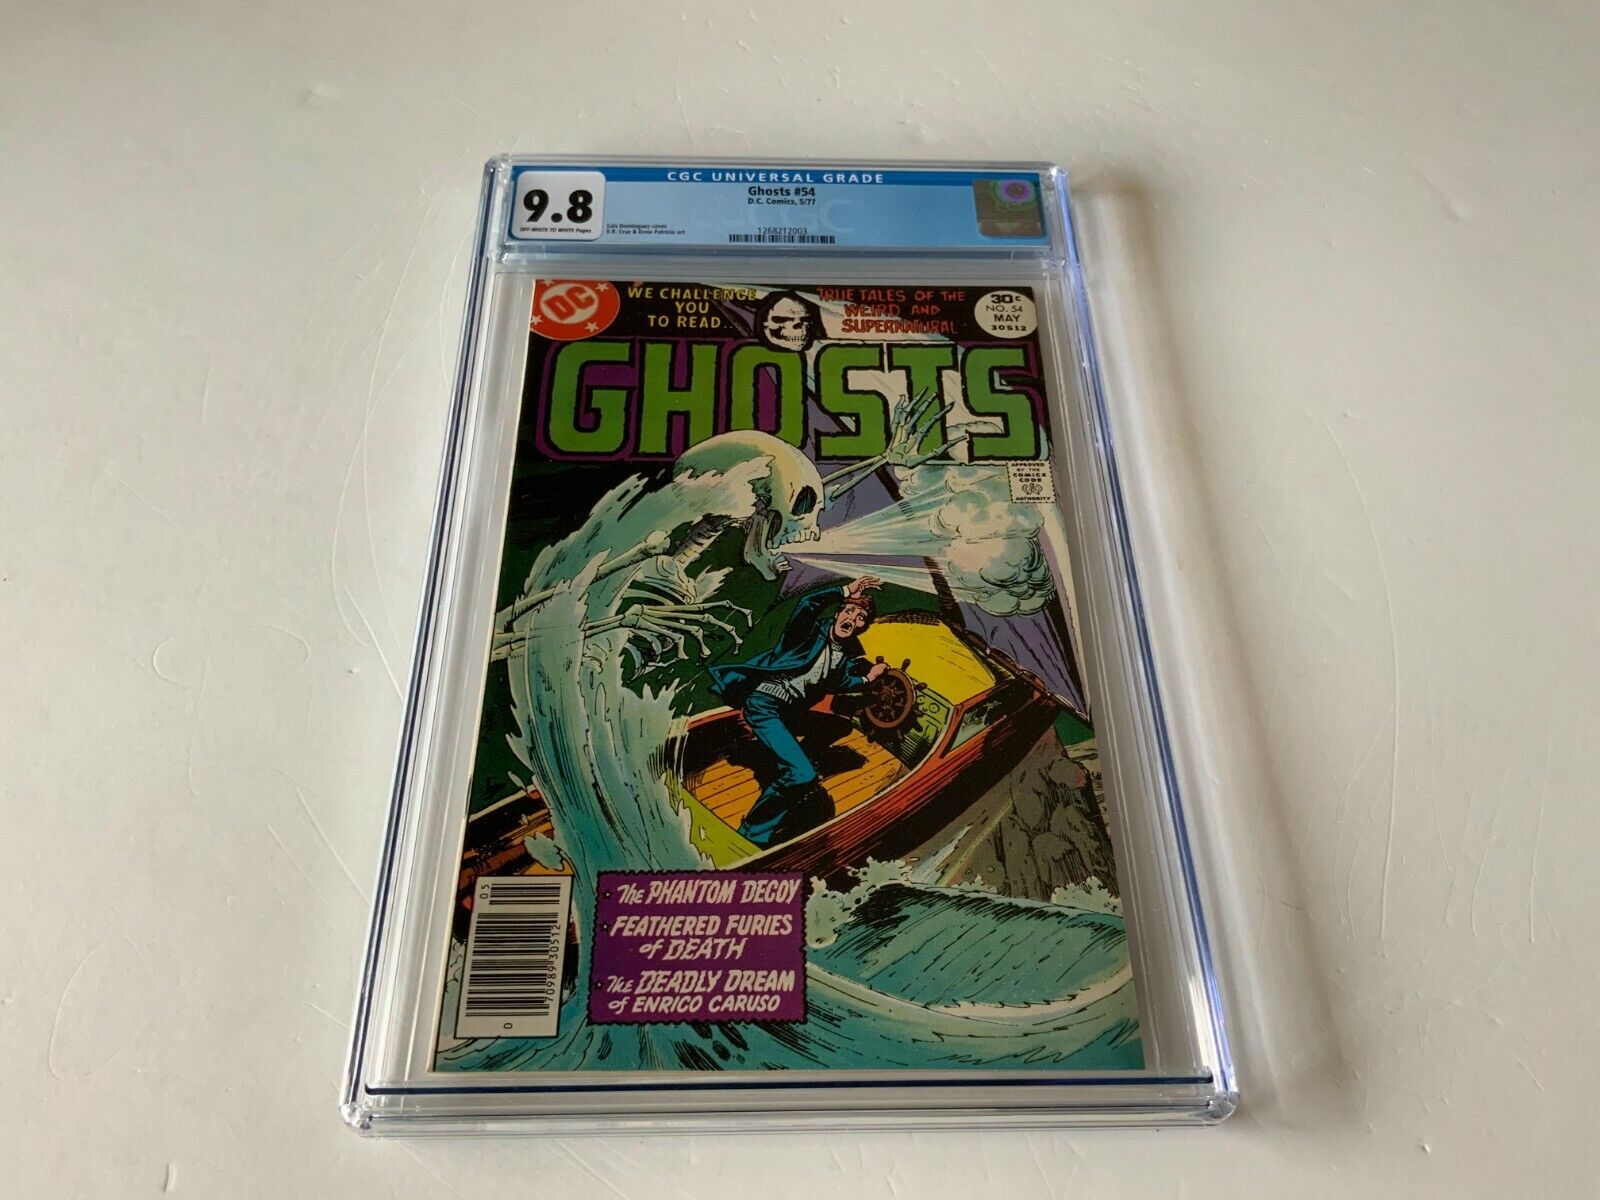 GHOSTS 54 CGC 9.8 DEADLY DREAM OF ENRICO CARUSO BOAT SKELETON DC COMICS 1977